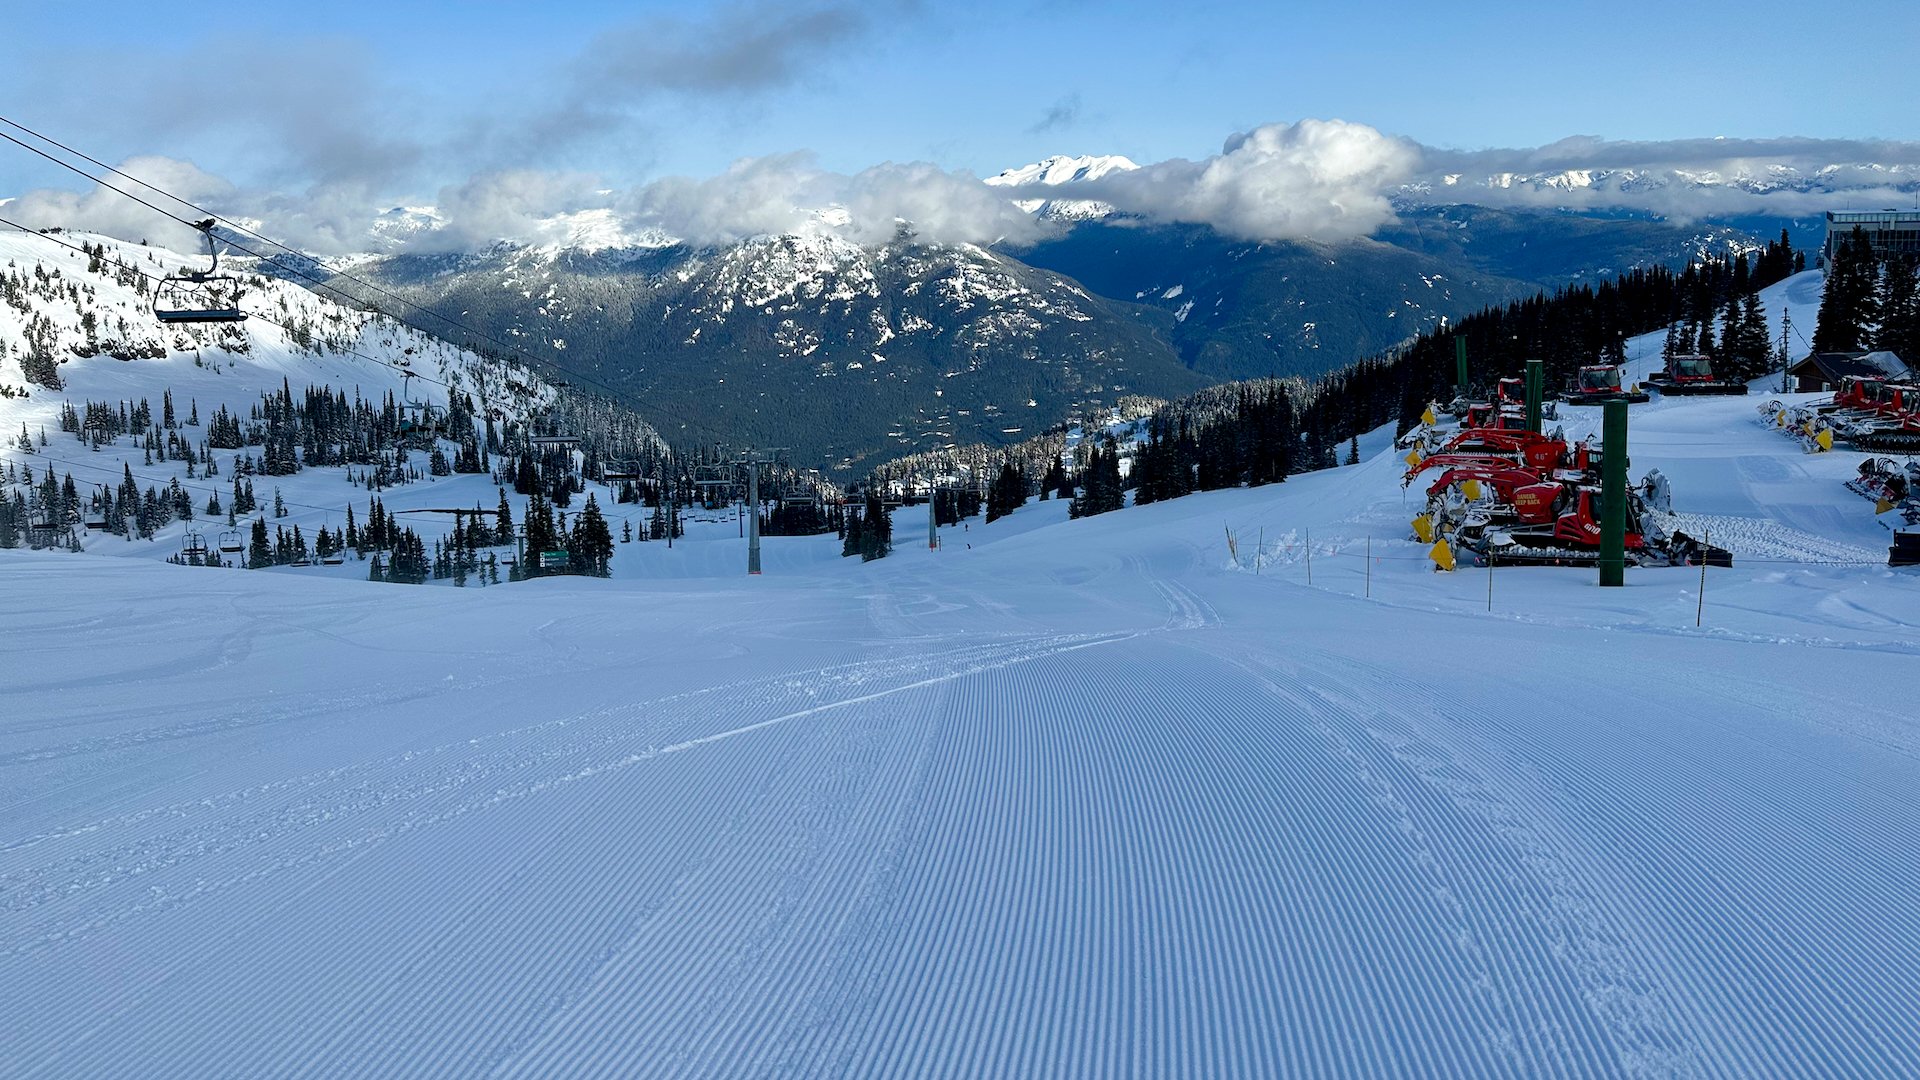  There was lots of almost untouched, nice new groomed corduroy for our first few trips down the mountain.  